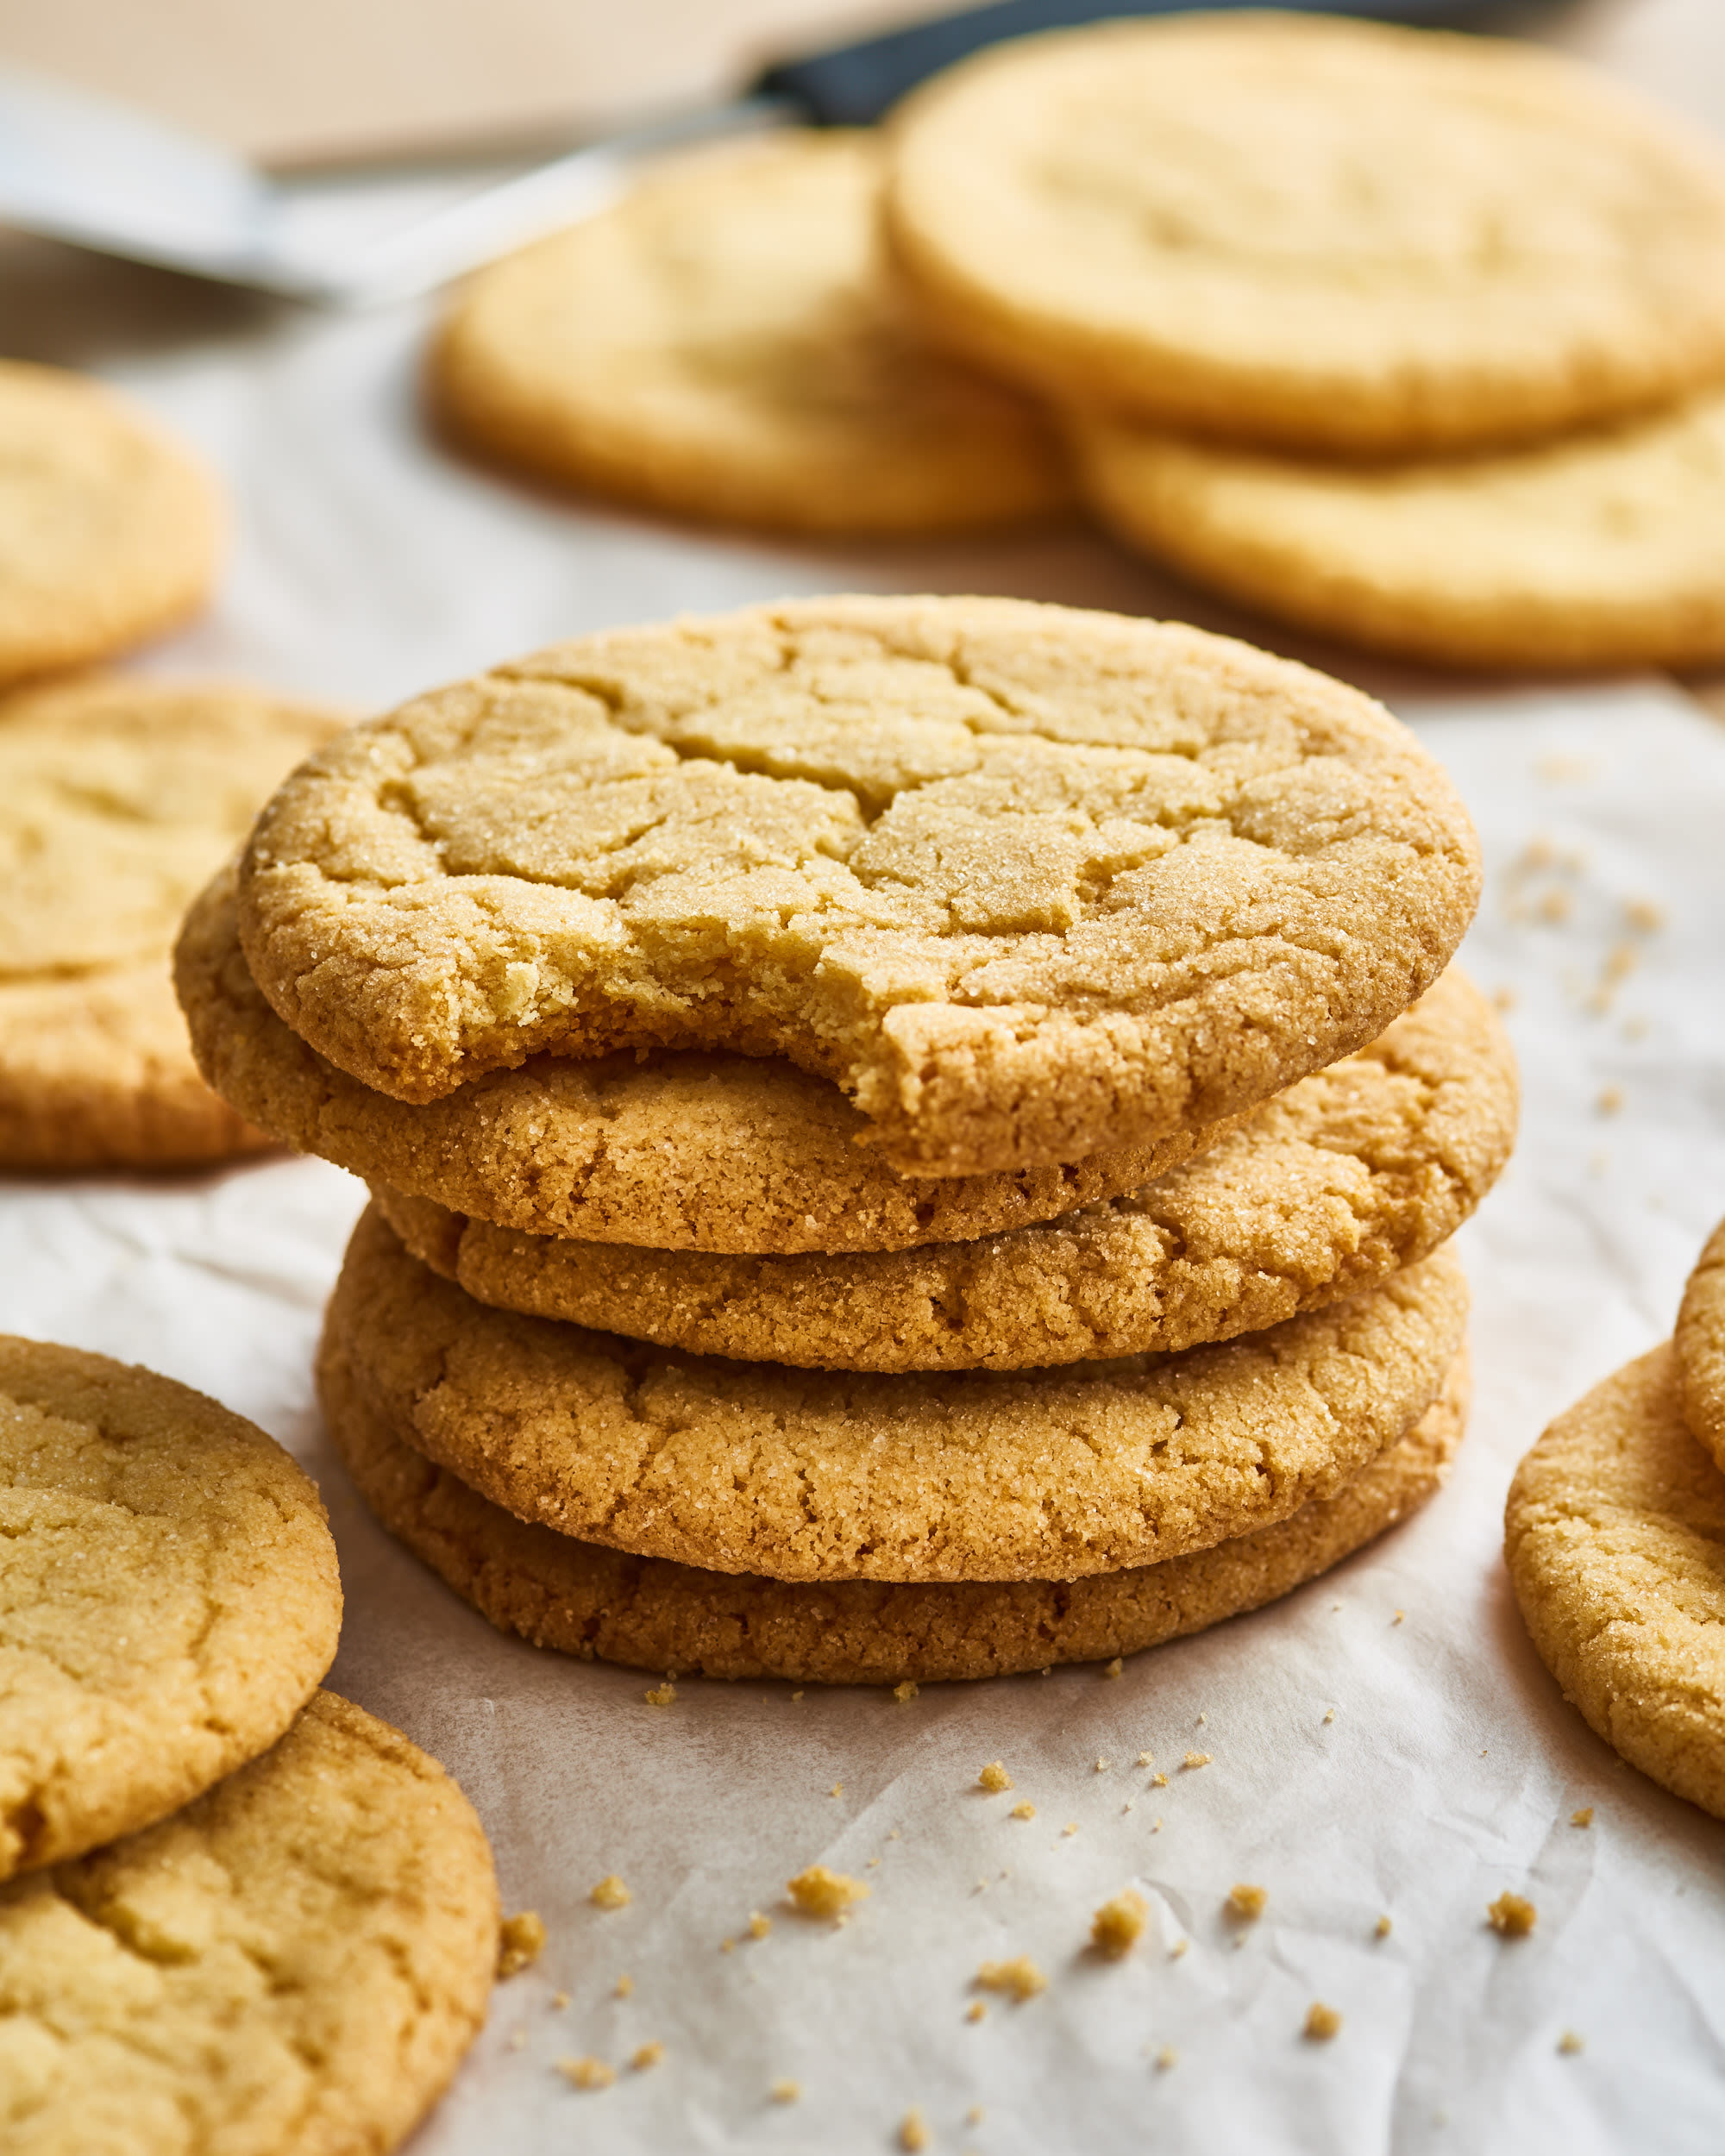 https://cdn.apartmenttherapy.info/image/upload/v1559934494/k/Photo/Recipes/2019-06-recipe-toasted-sugar-cookie/Toasted-Sugar-Cookies_71111.jpg